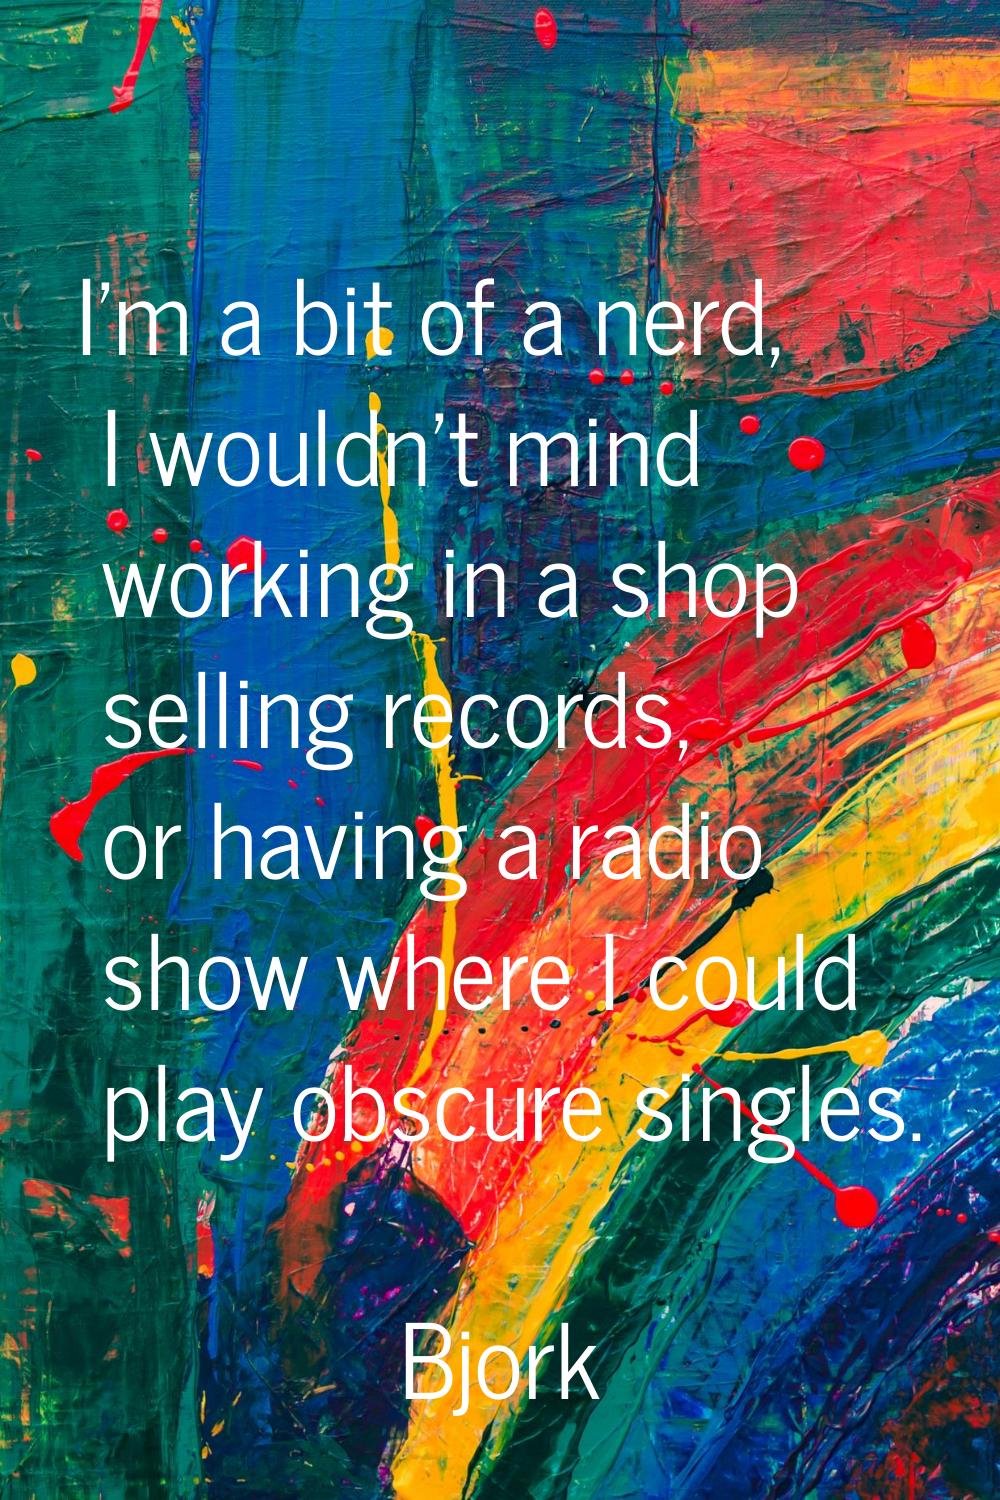 I'm a bit of a nerd, I wouldn't mind working in a shop selling records, or having a radio show wher